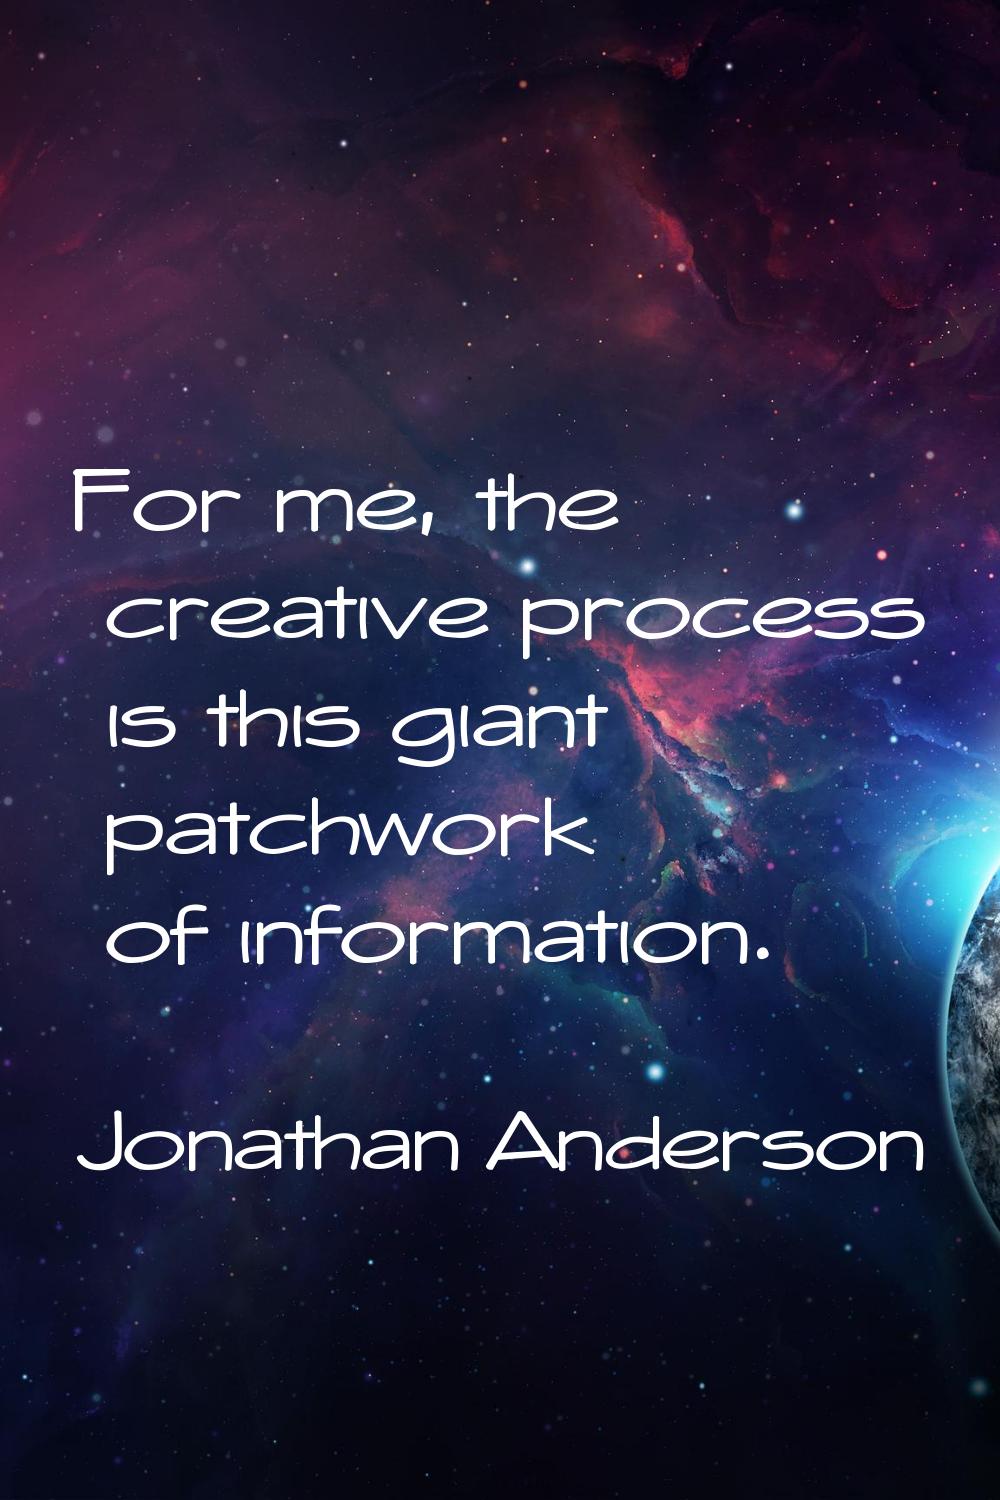 For me, the creative process is this giant patchwork of information.